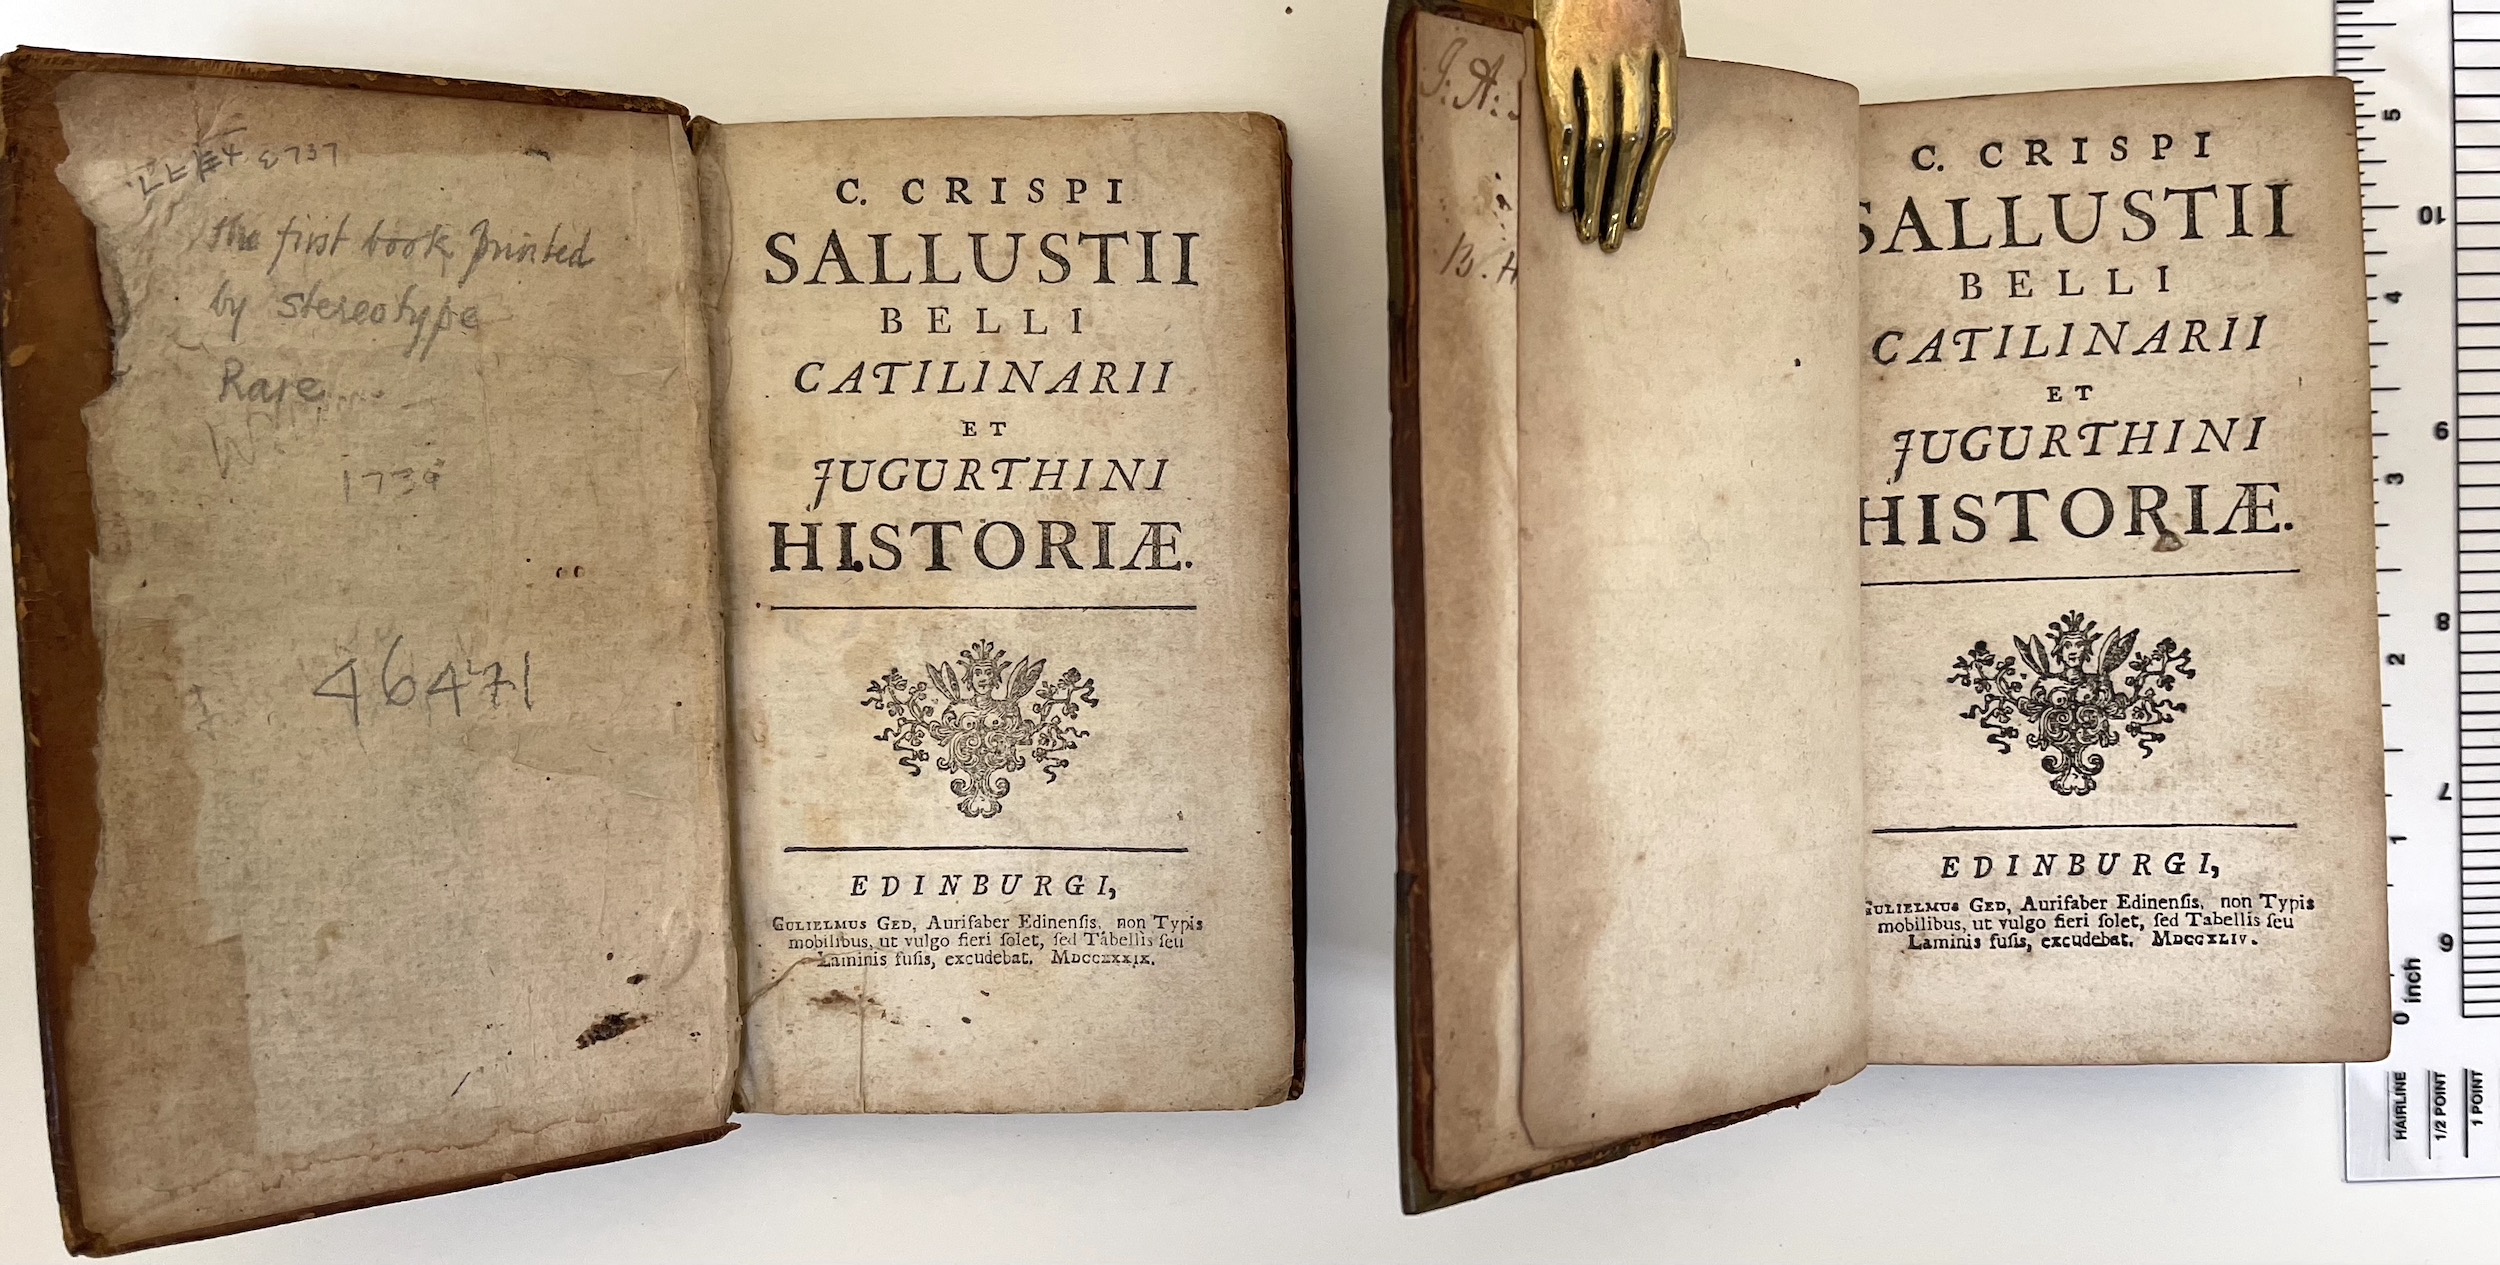 1739 first edition of Ged's Sallust on the left; the 1744 second edition on the right. They are, except for the imprint, basically identical.